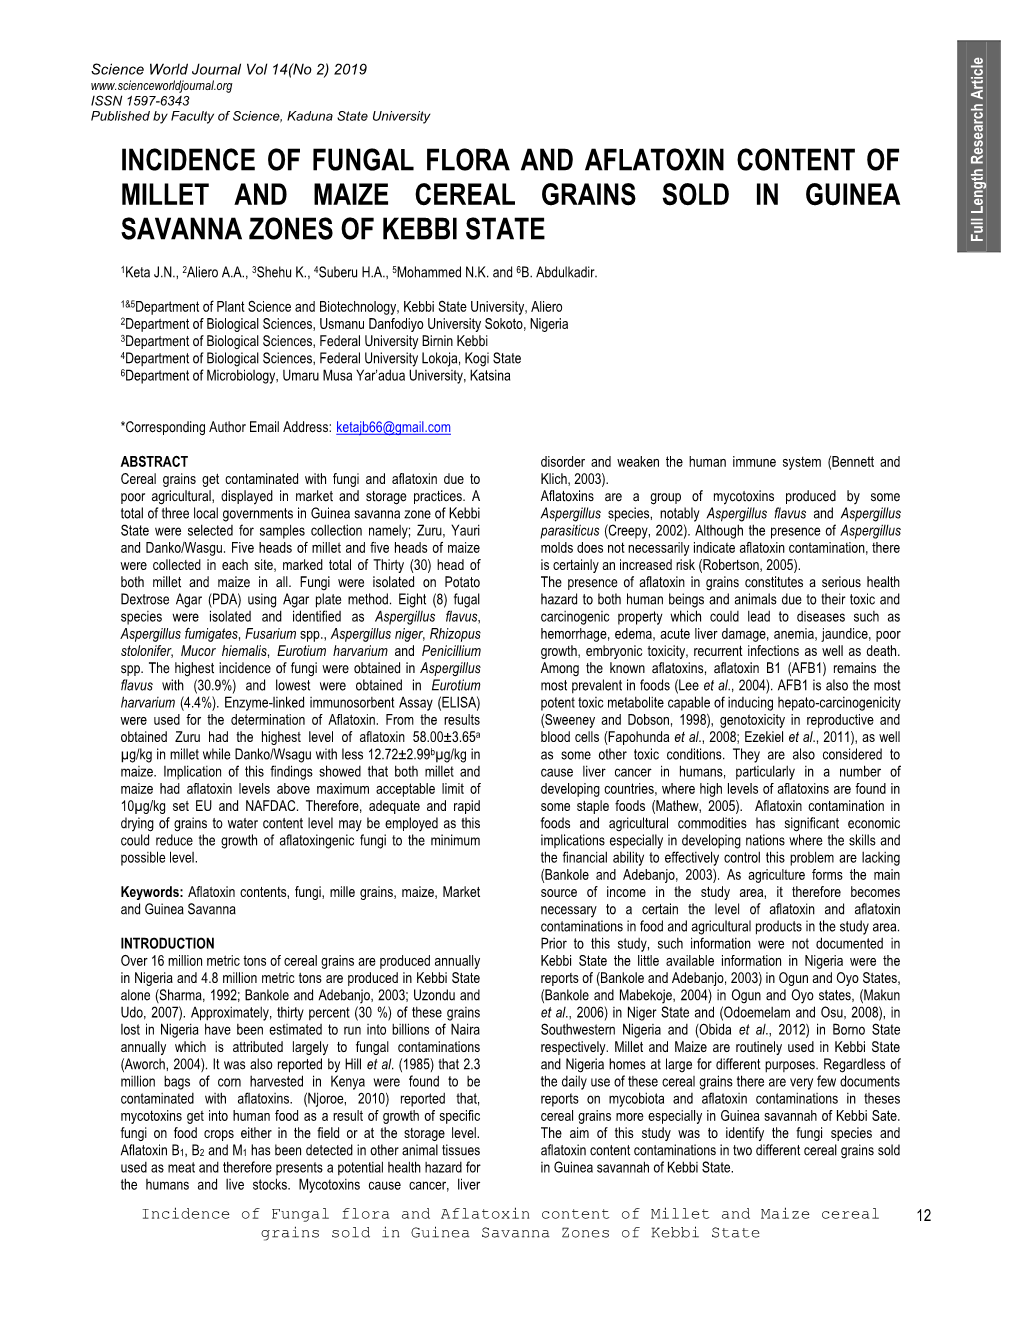 Incidence of Fungal Flora and Aflatoxin Content of Millet and Maize Cereal Grains Sold in Guinea